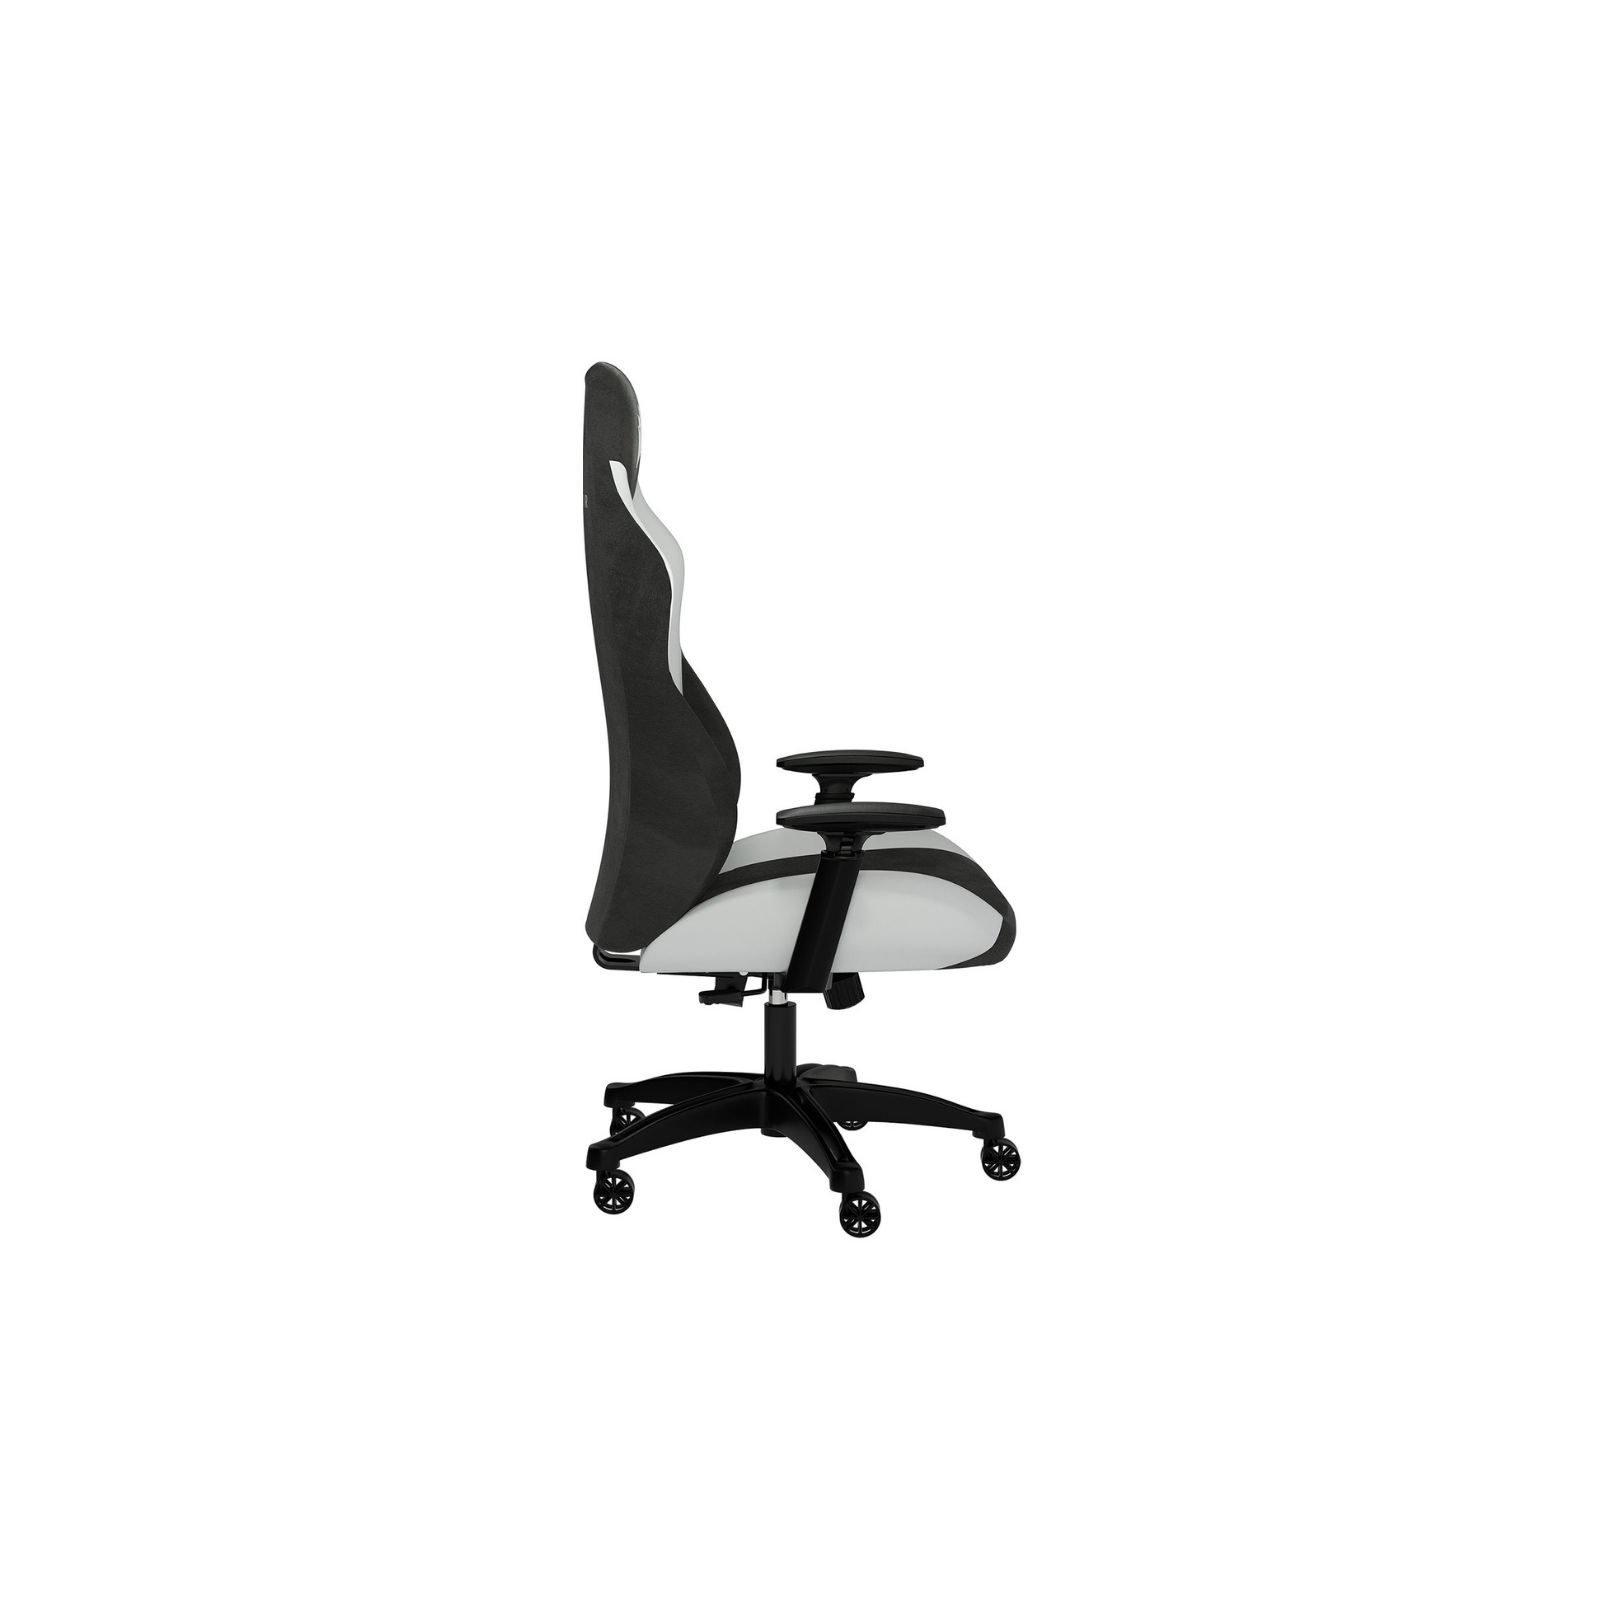 Corsair Cf-9010040-Ww Tc70 Remix Black + White Remix Gaming Chair – With Solid Steel Construction 3d Adjustable Armrests (Vertical + Front-To-Back + Swivel) Adjustable Height + Recline + Tilt Nylon Caster Wheels Foam Lumbar Support Bottom + Front +